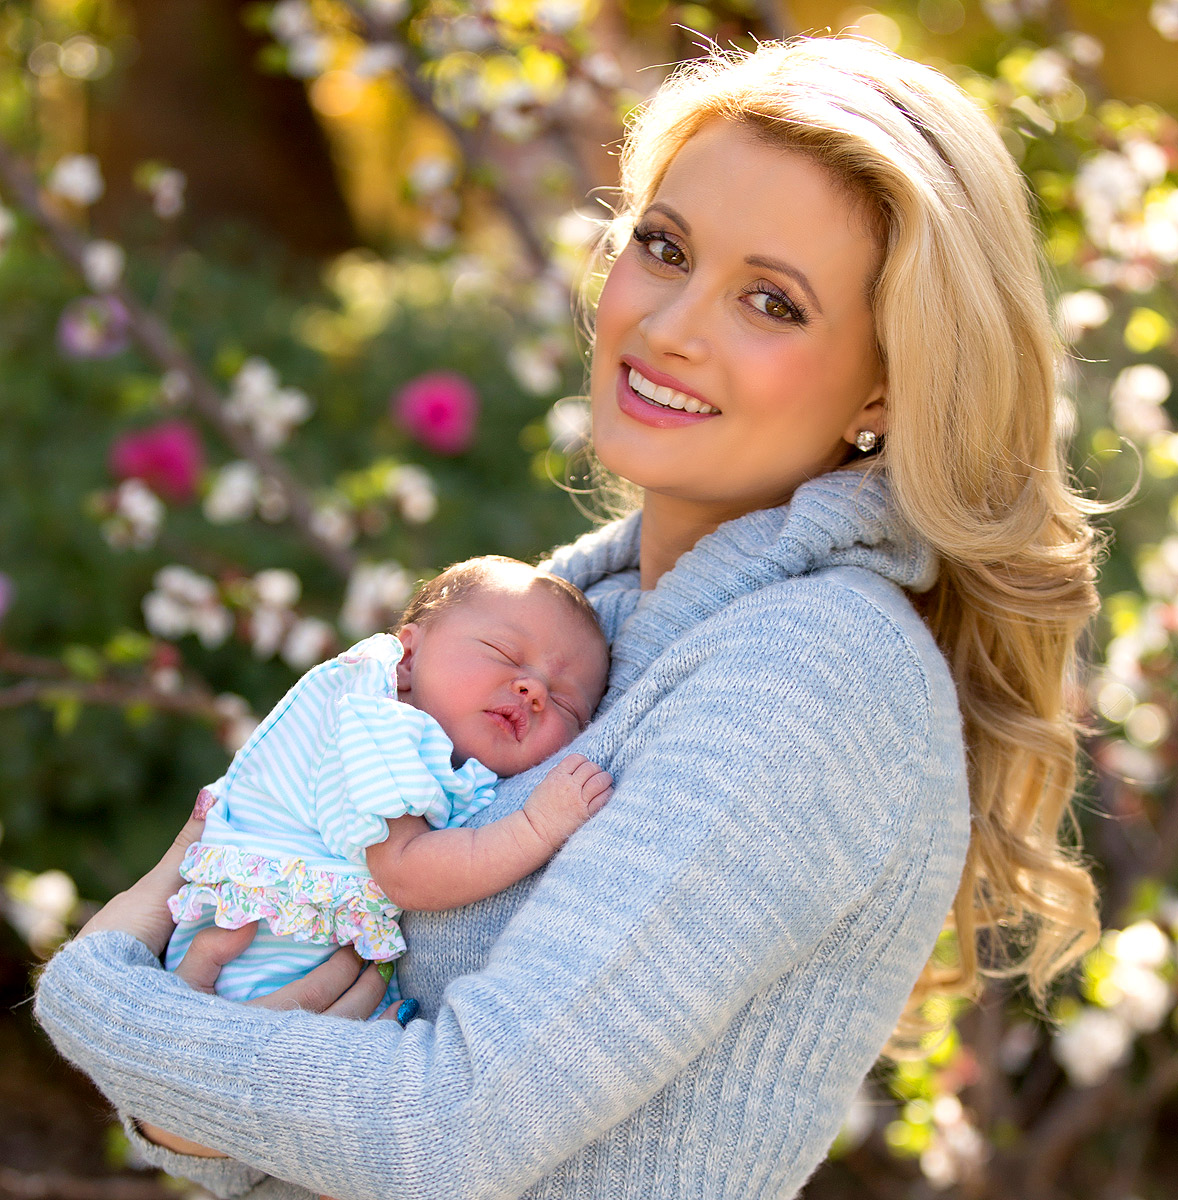 Holly Madison Reveals Her Baby Boy's Name! - Mum's Lounge